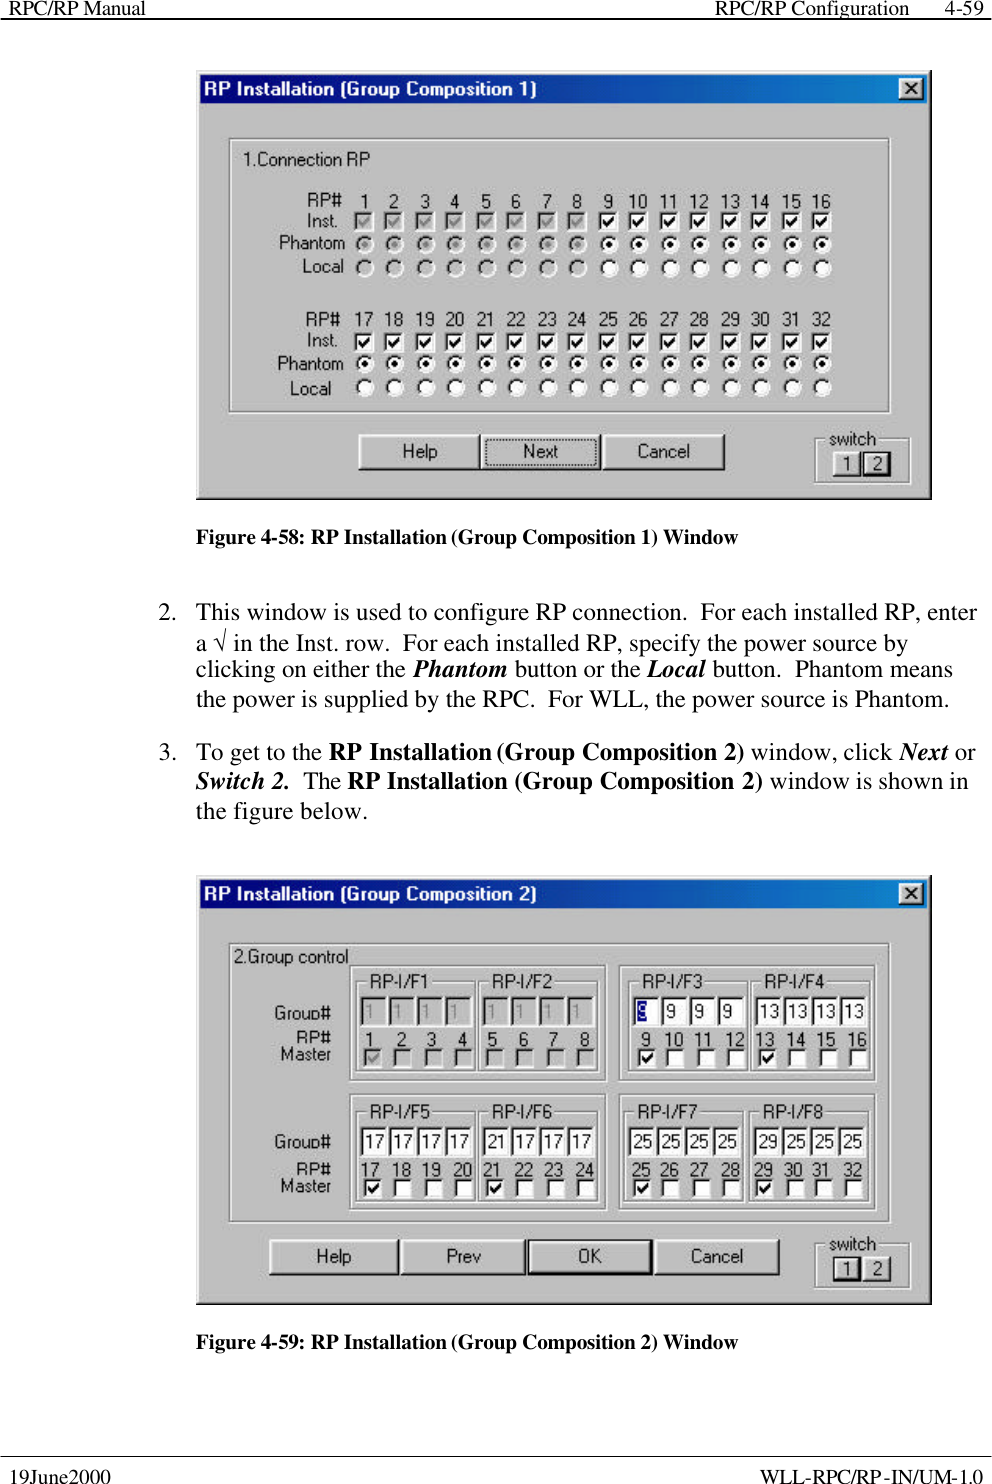 RPC/RP Manual    RPC/RP Configuration 19June2000    WLL-RPC/RP-IN/UM-1.0 4-59 Figure 4-58: RP Installation (Group Composition 1) Window 2.  This window is used to configure RP connection.  For each installed RP, enter a √ in the Inst. row.  For each installed RP, specify the power source by clicking on either the Phantom button or the Local button.  Phantom means the power is supplied by the RPC.  For WLL, the power source is Phantom. 3.  To get to the RP Installation (Group Composition 2) window, click Next or Switch 2.  The RP Installation (Group Composition 2) window is shown in the figure below.  Figure 4-59: RP Installation (Group Composition 2) Window 